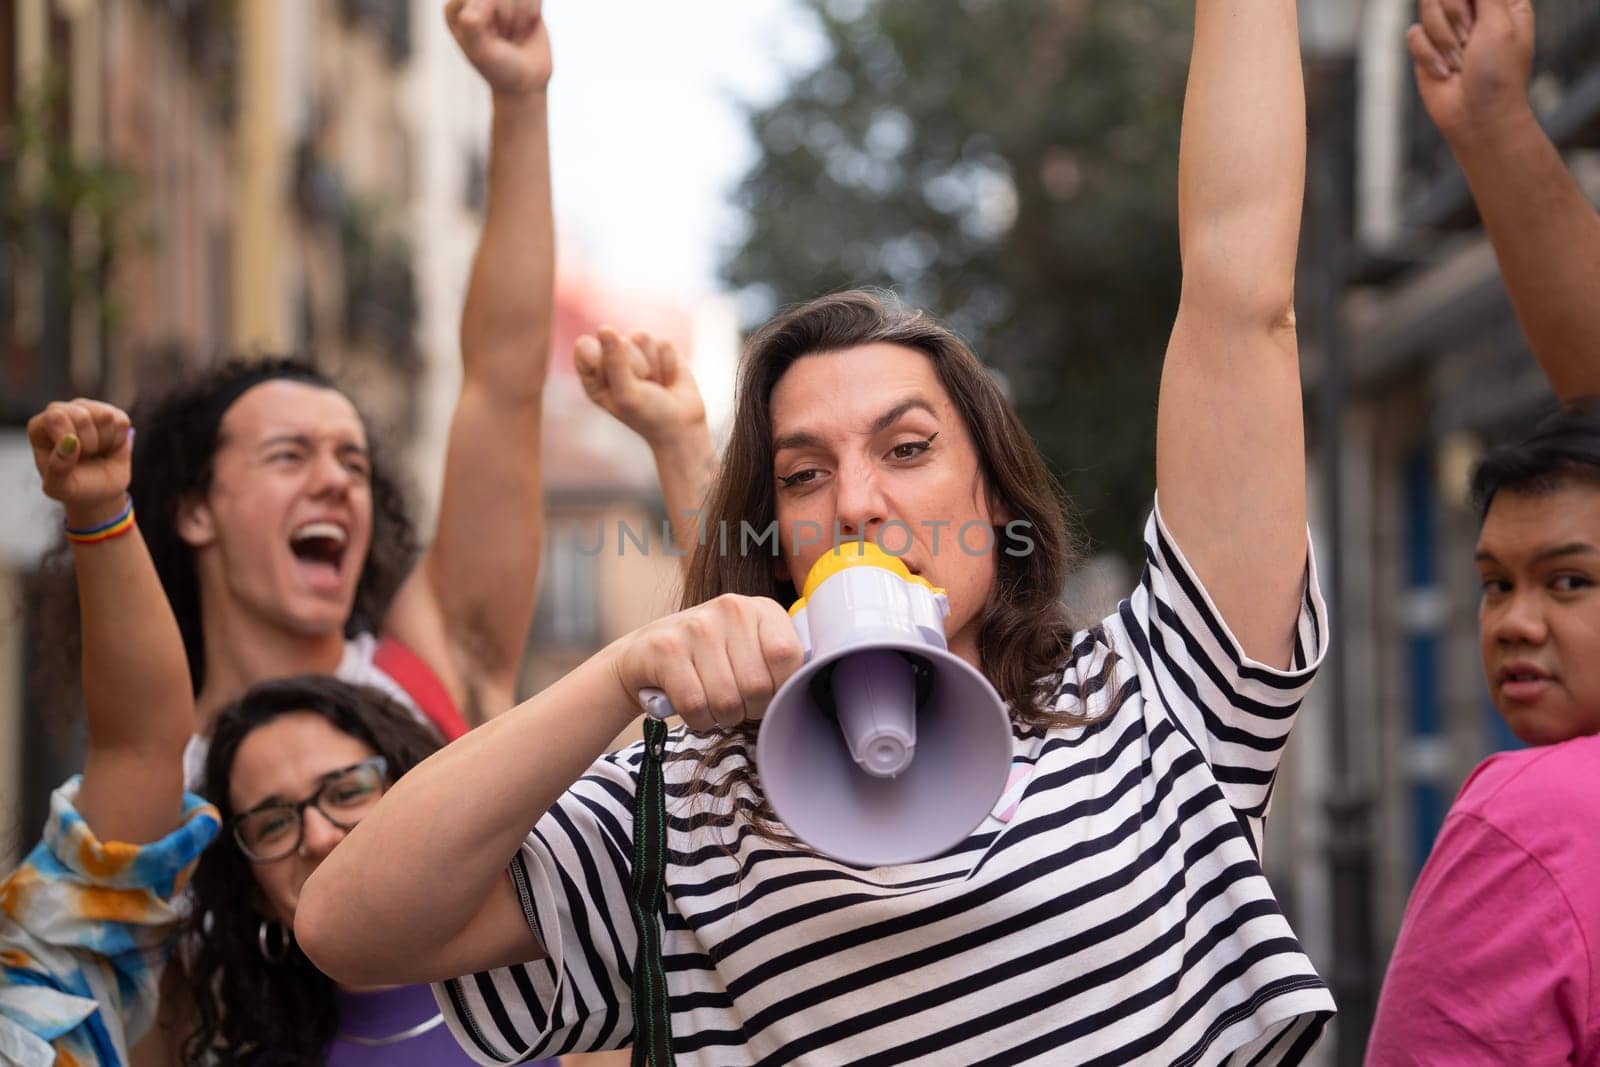 Transgender woman screaming during a protest to support LGBTQ community. Horizontal by papatonic